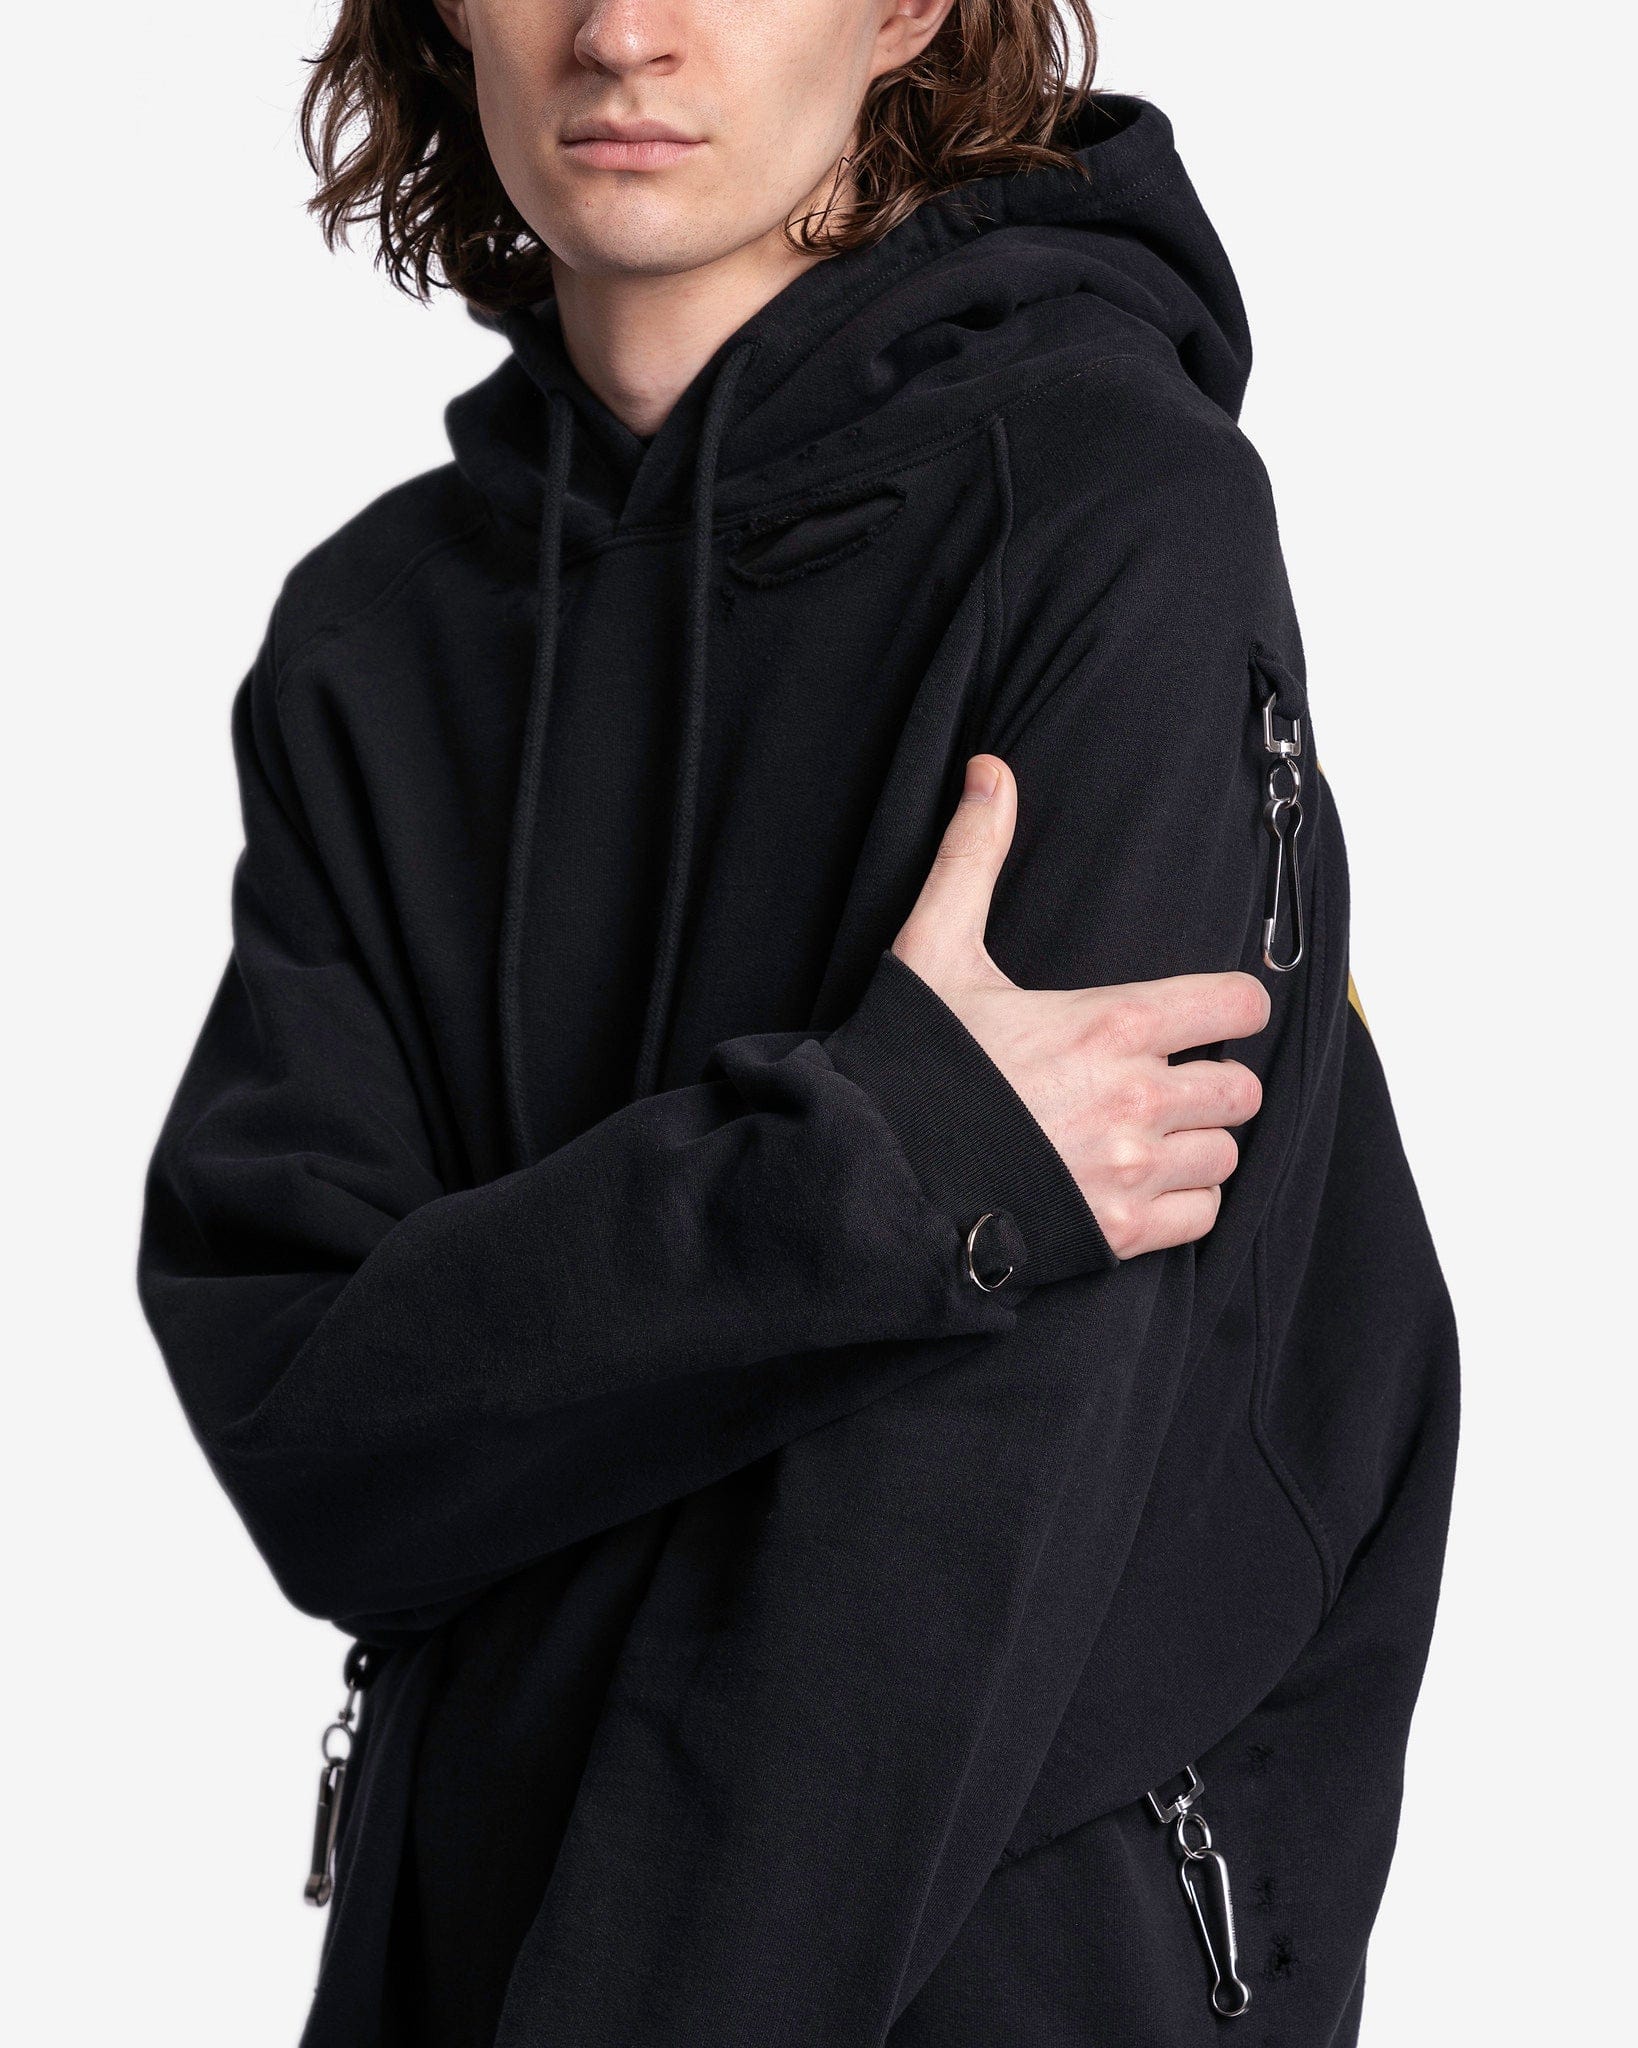 Raf Simons Men's Sneakers Washed Big Fit Hoodie with Clasps and Patch in Black